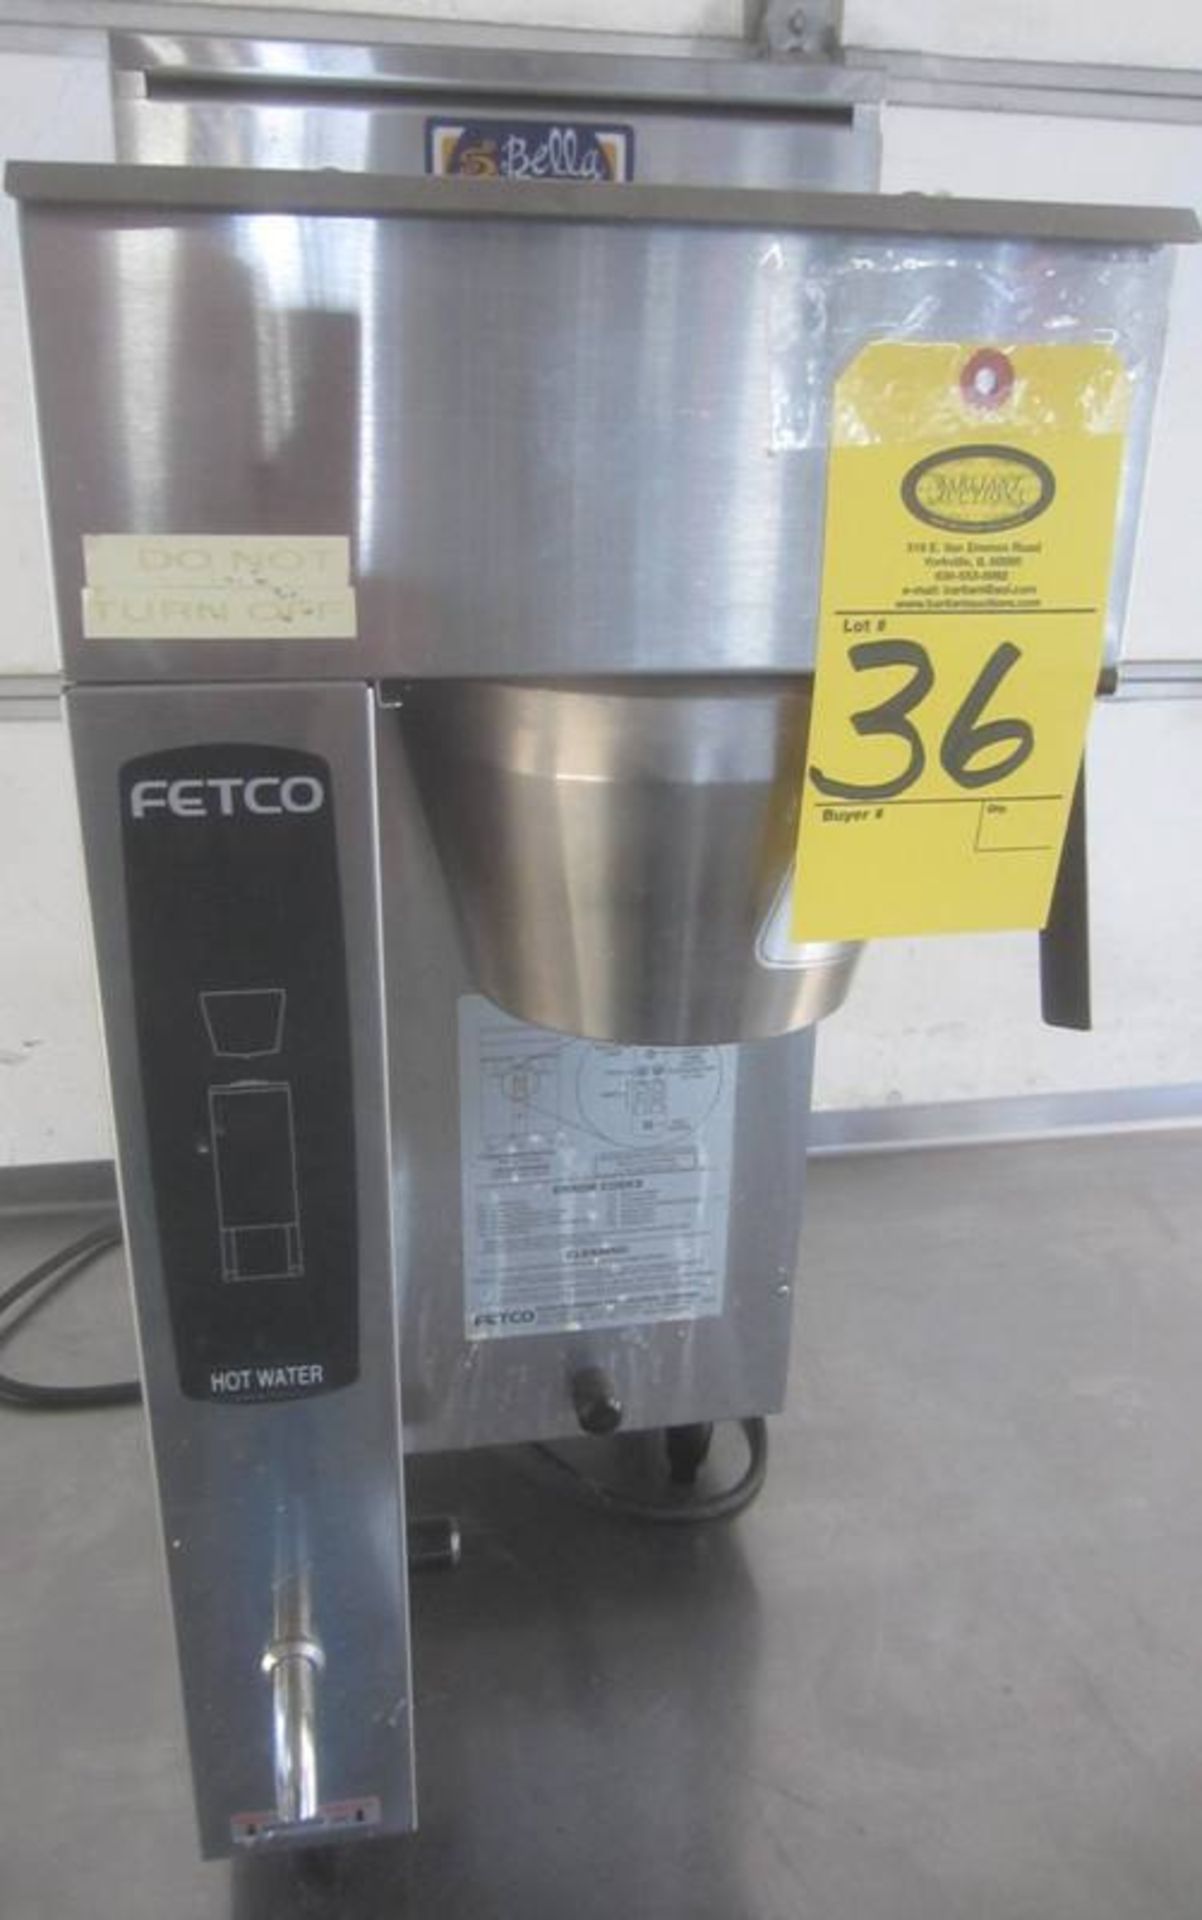 Fetco Mdl. 2031 Commercial Coffee Brewer, Ser. #340151020453B, tested, works